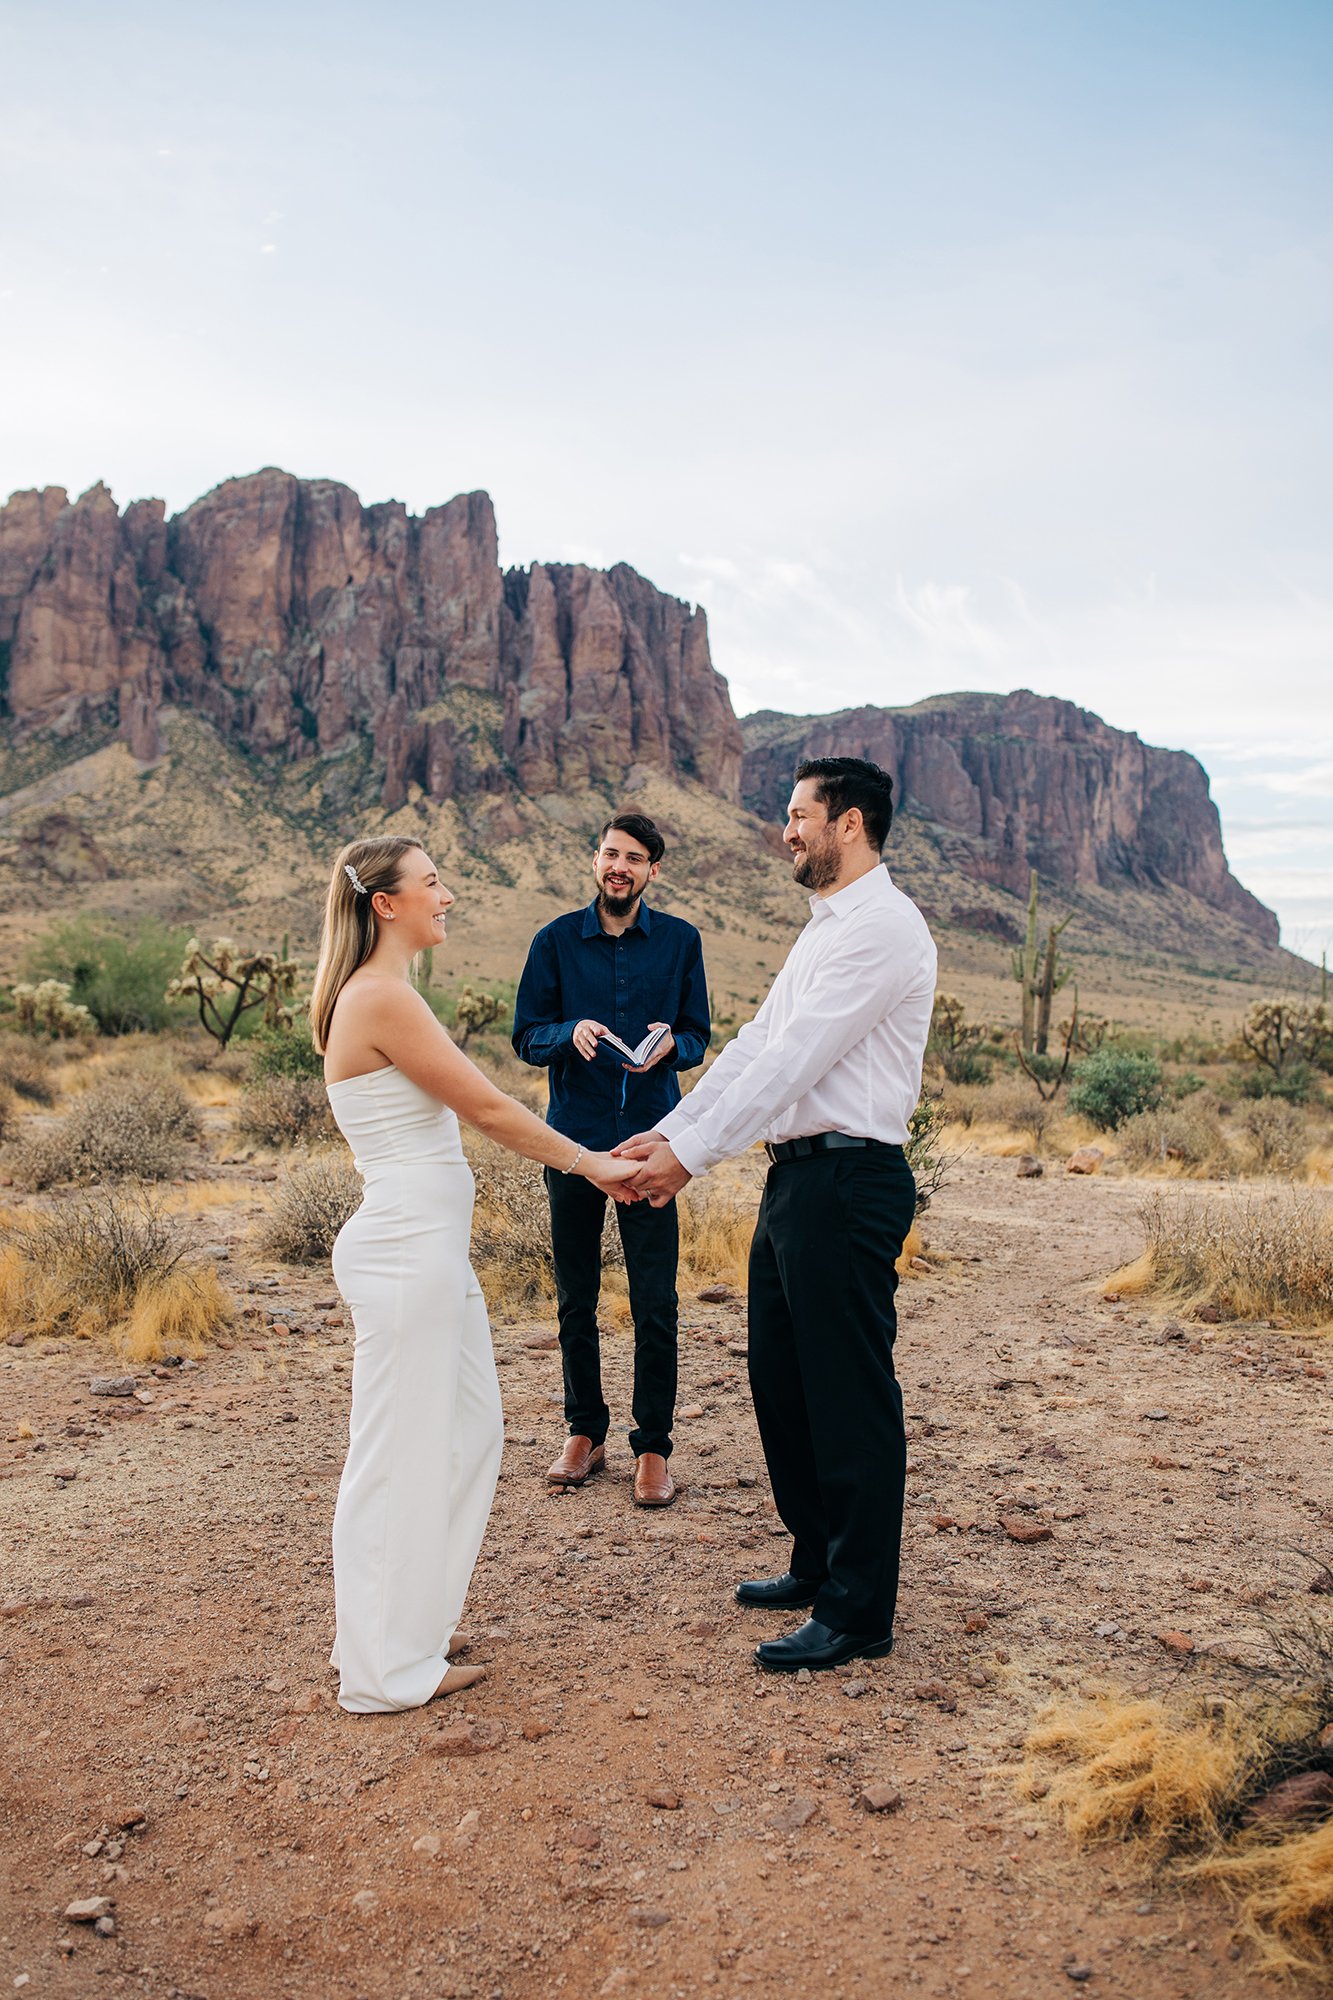 the-joys-of-a-morning-elopement-an-intimate-wedding-in-the-arizona-desert-12.jpg